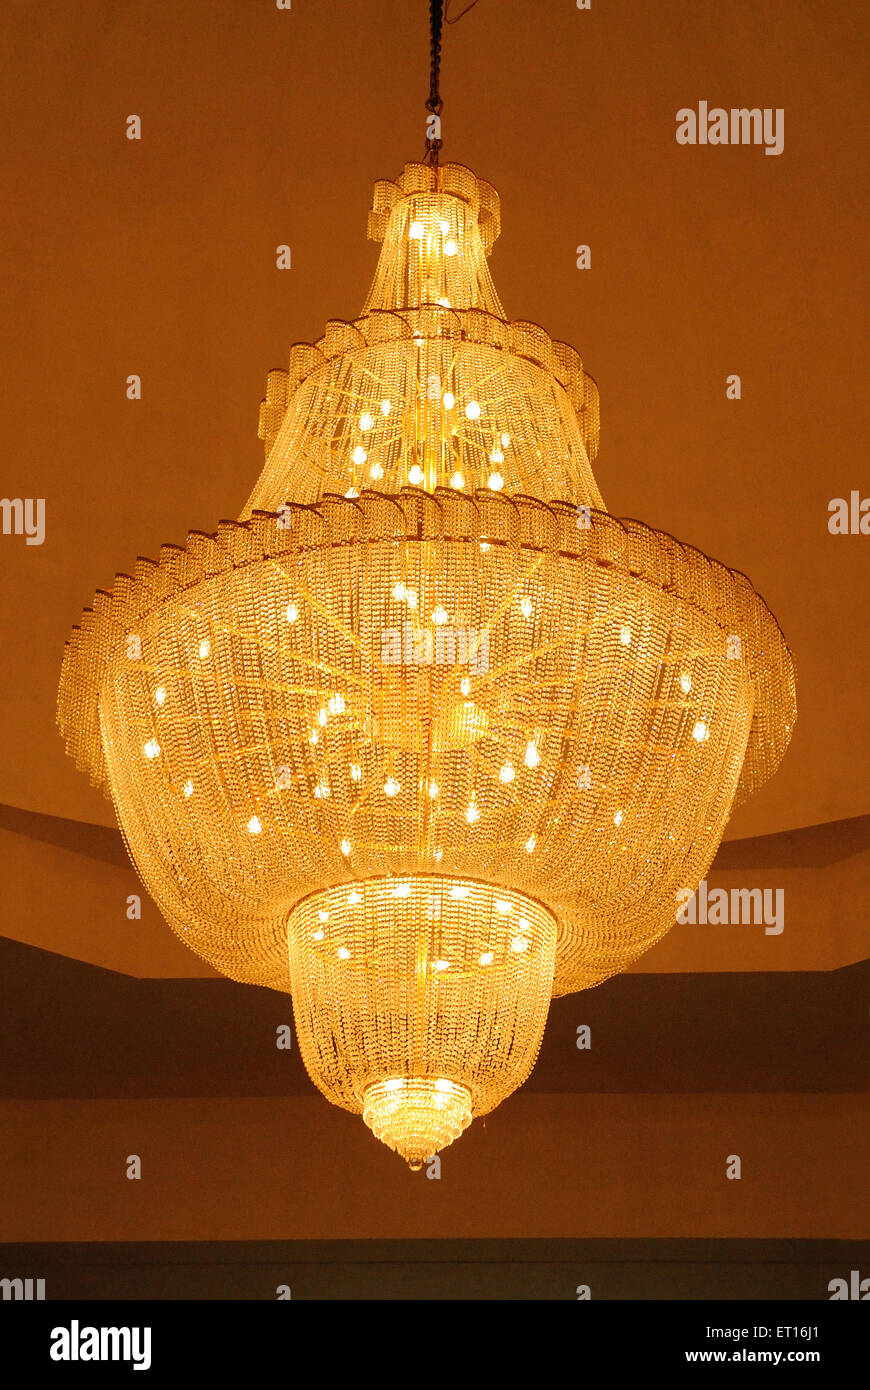 Chandelier at temple ; India Stock Photo